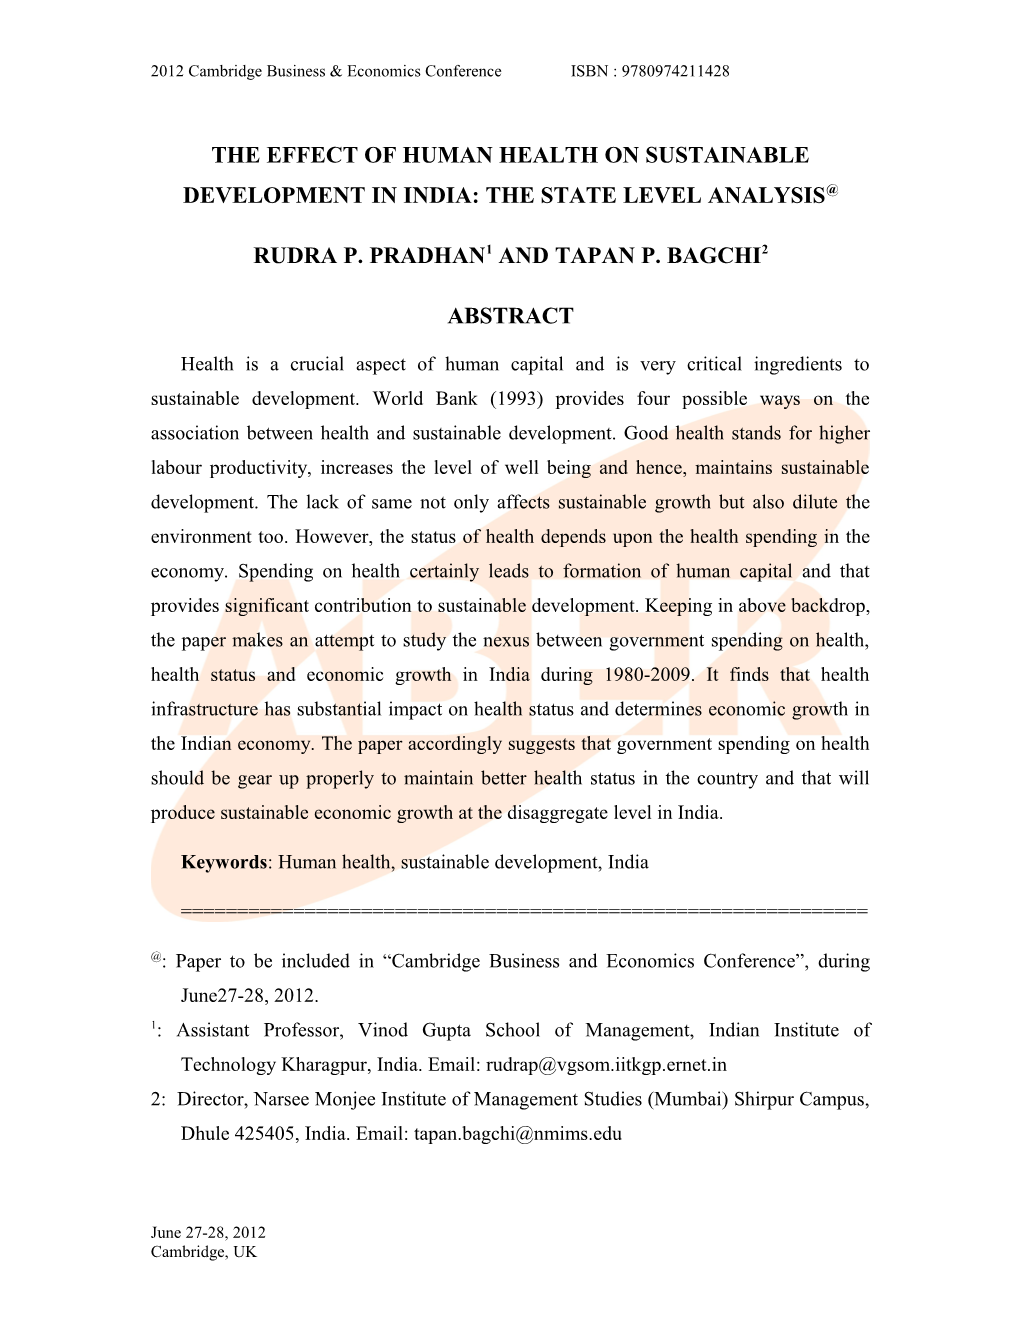 The Effect of Human Health on Sustainable Development in India: the State Level Analysis